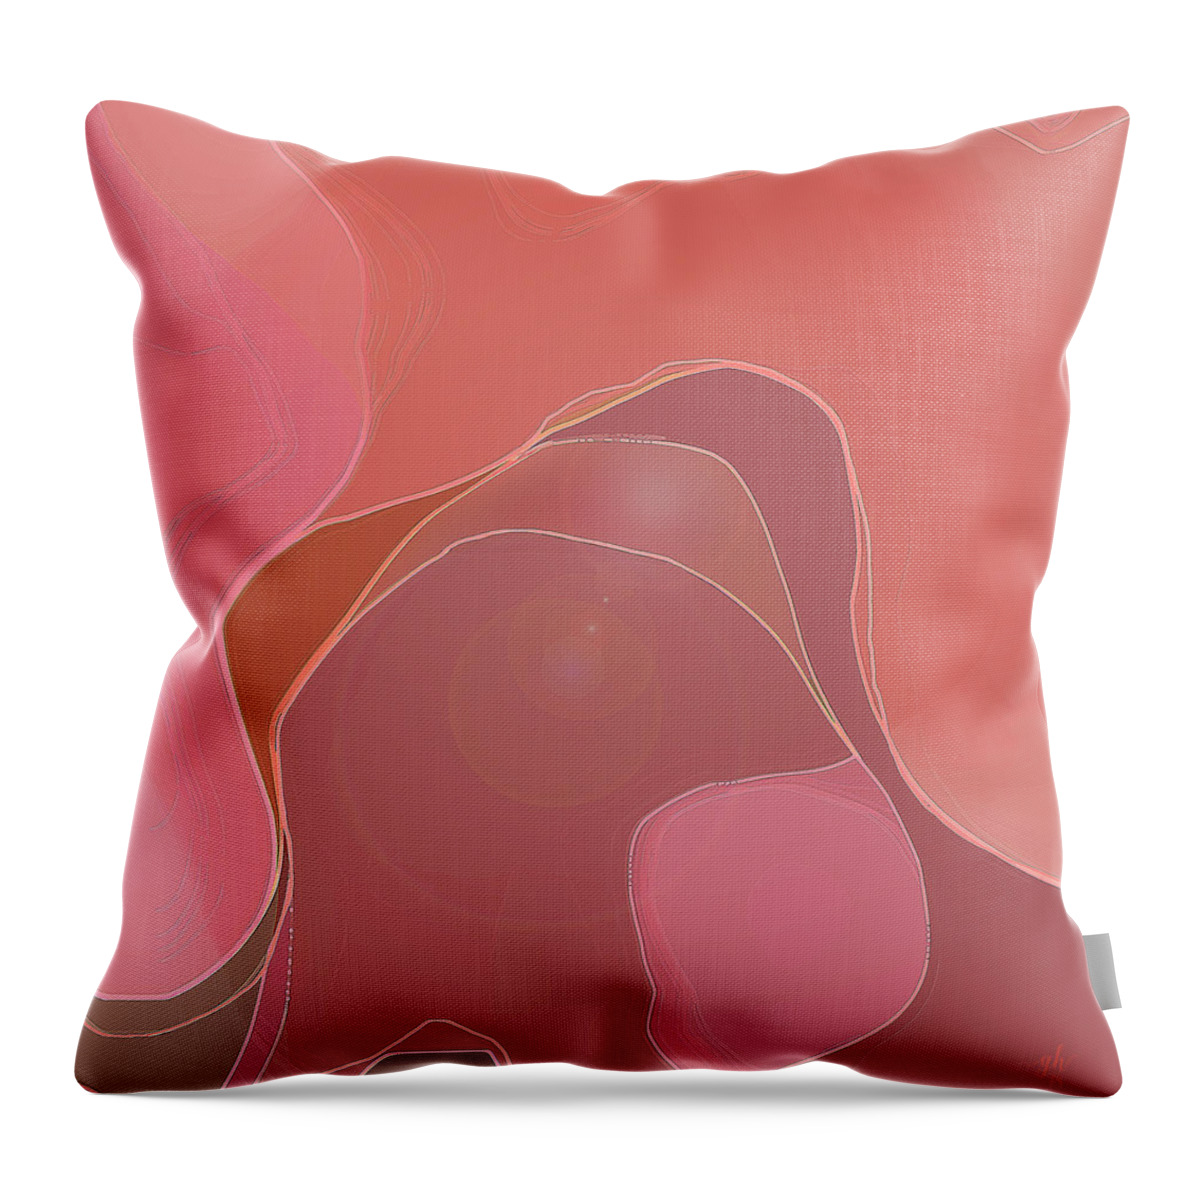 Abstract Throw Pillow featuring the digital art Blush by Gina Harrison